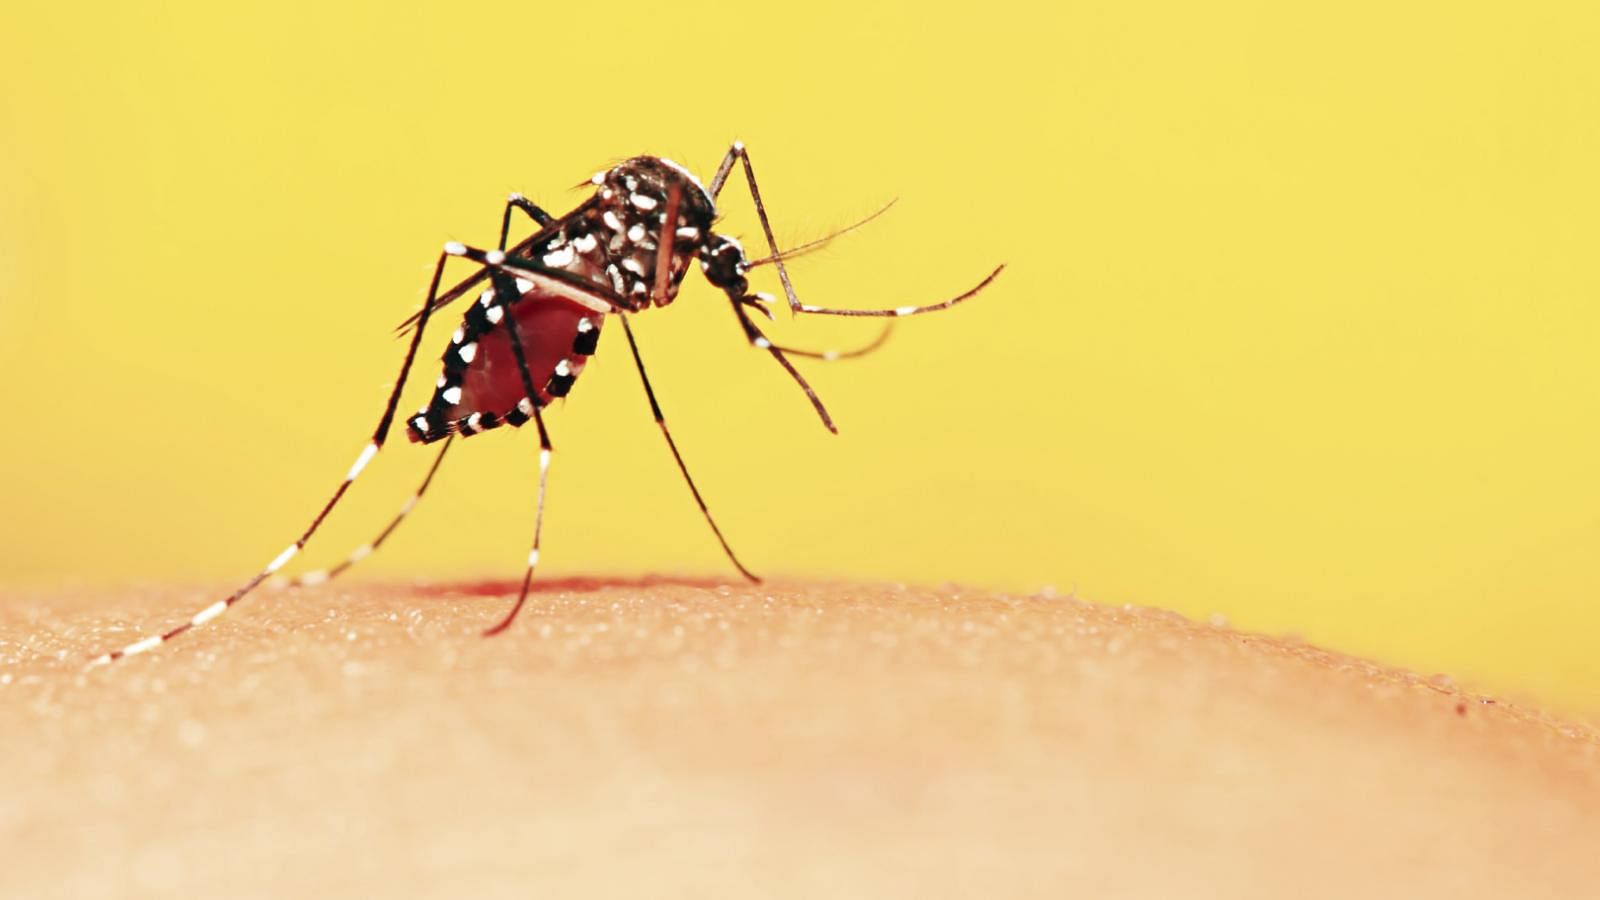 If malaria is a curable disease with effective treatment, why does it still kill so many?